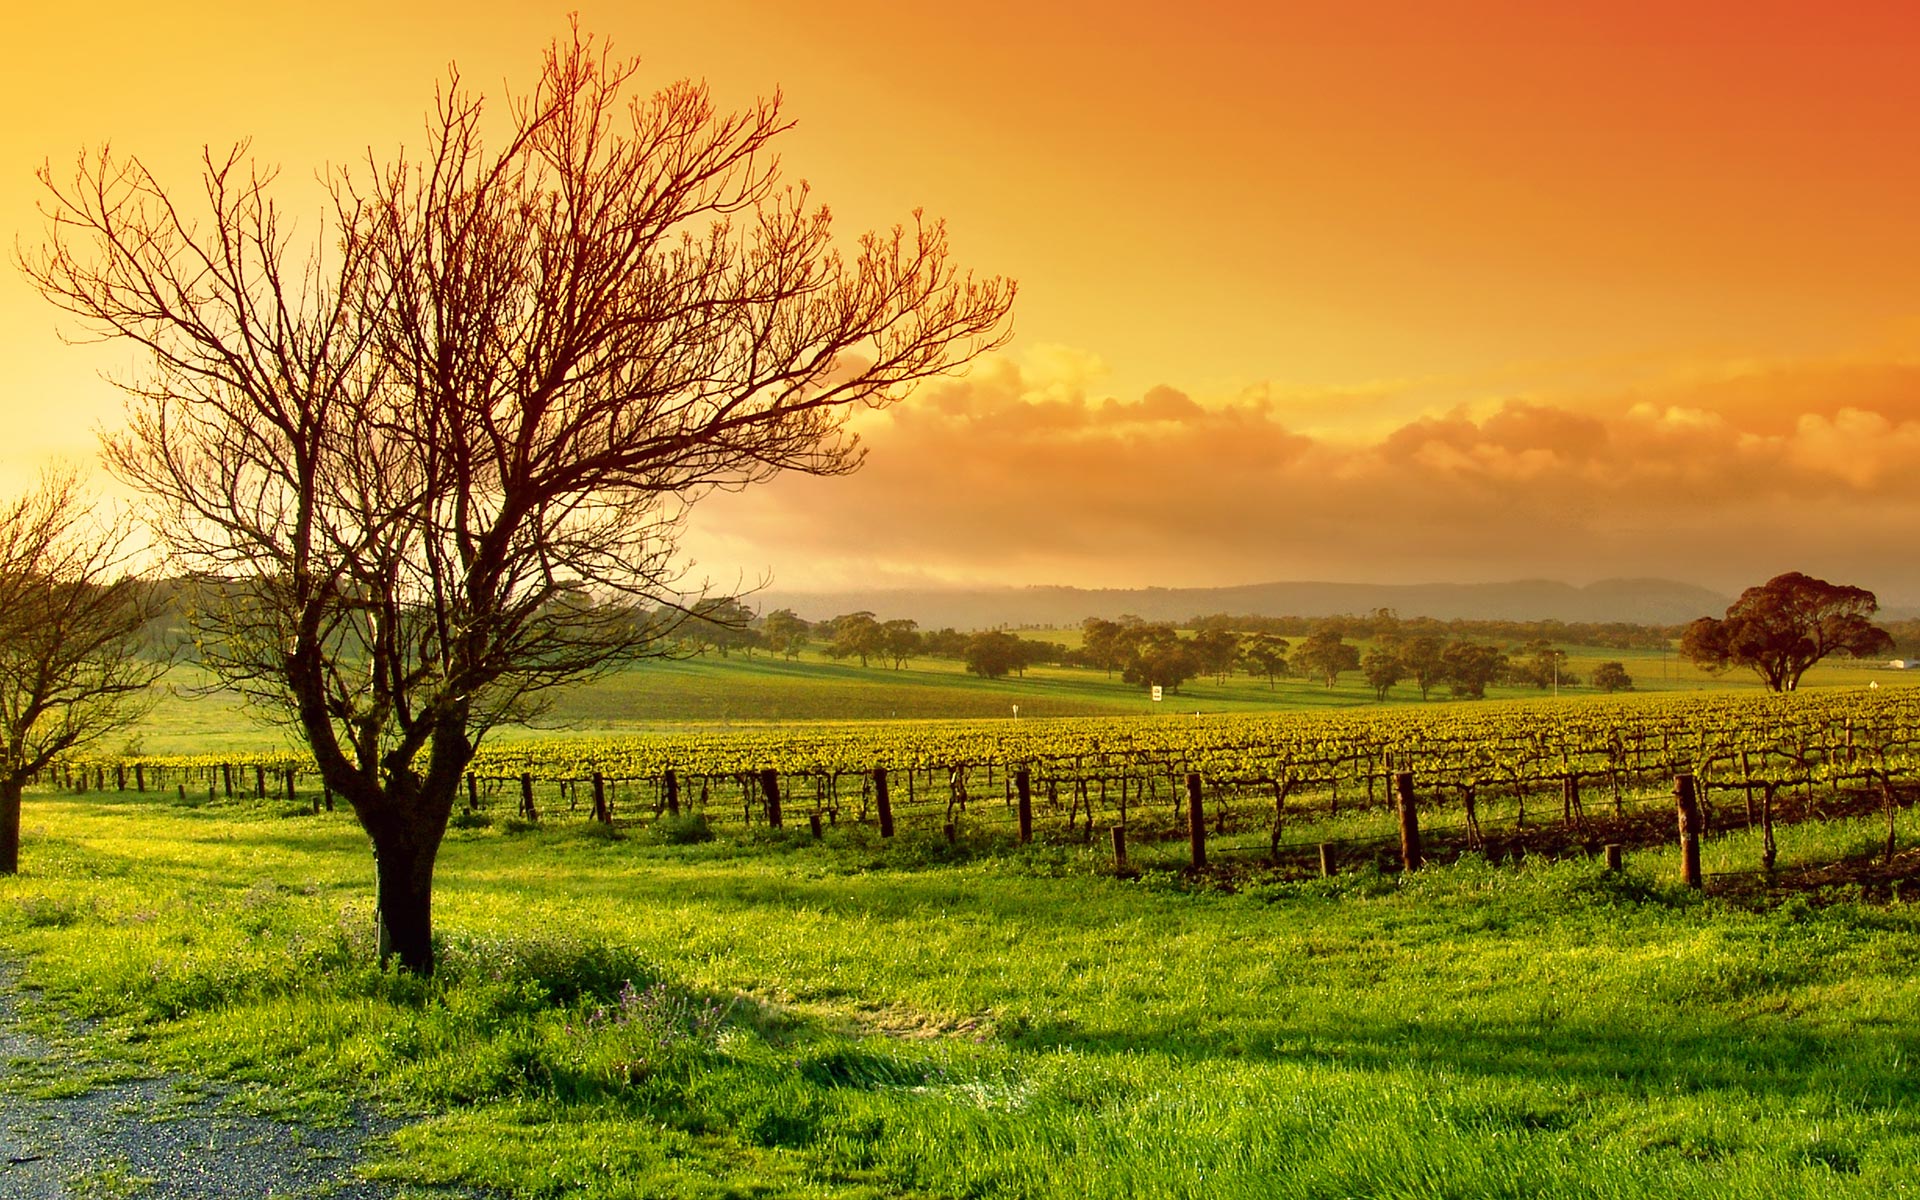 Nature Hd Wallpapers - Country Scenery Facebook Cover - 1920x1200 Wallpaper  